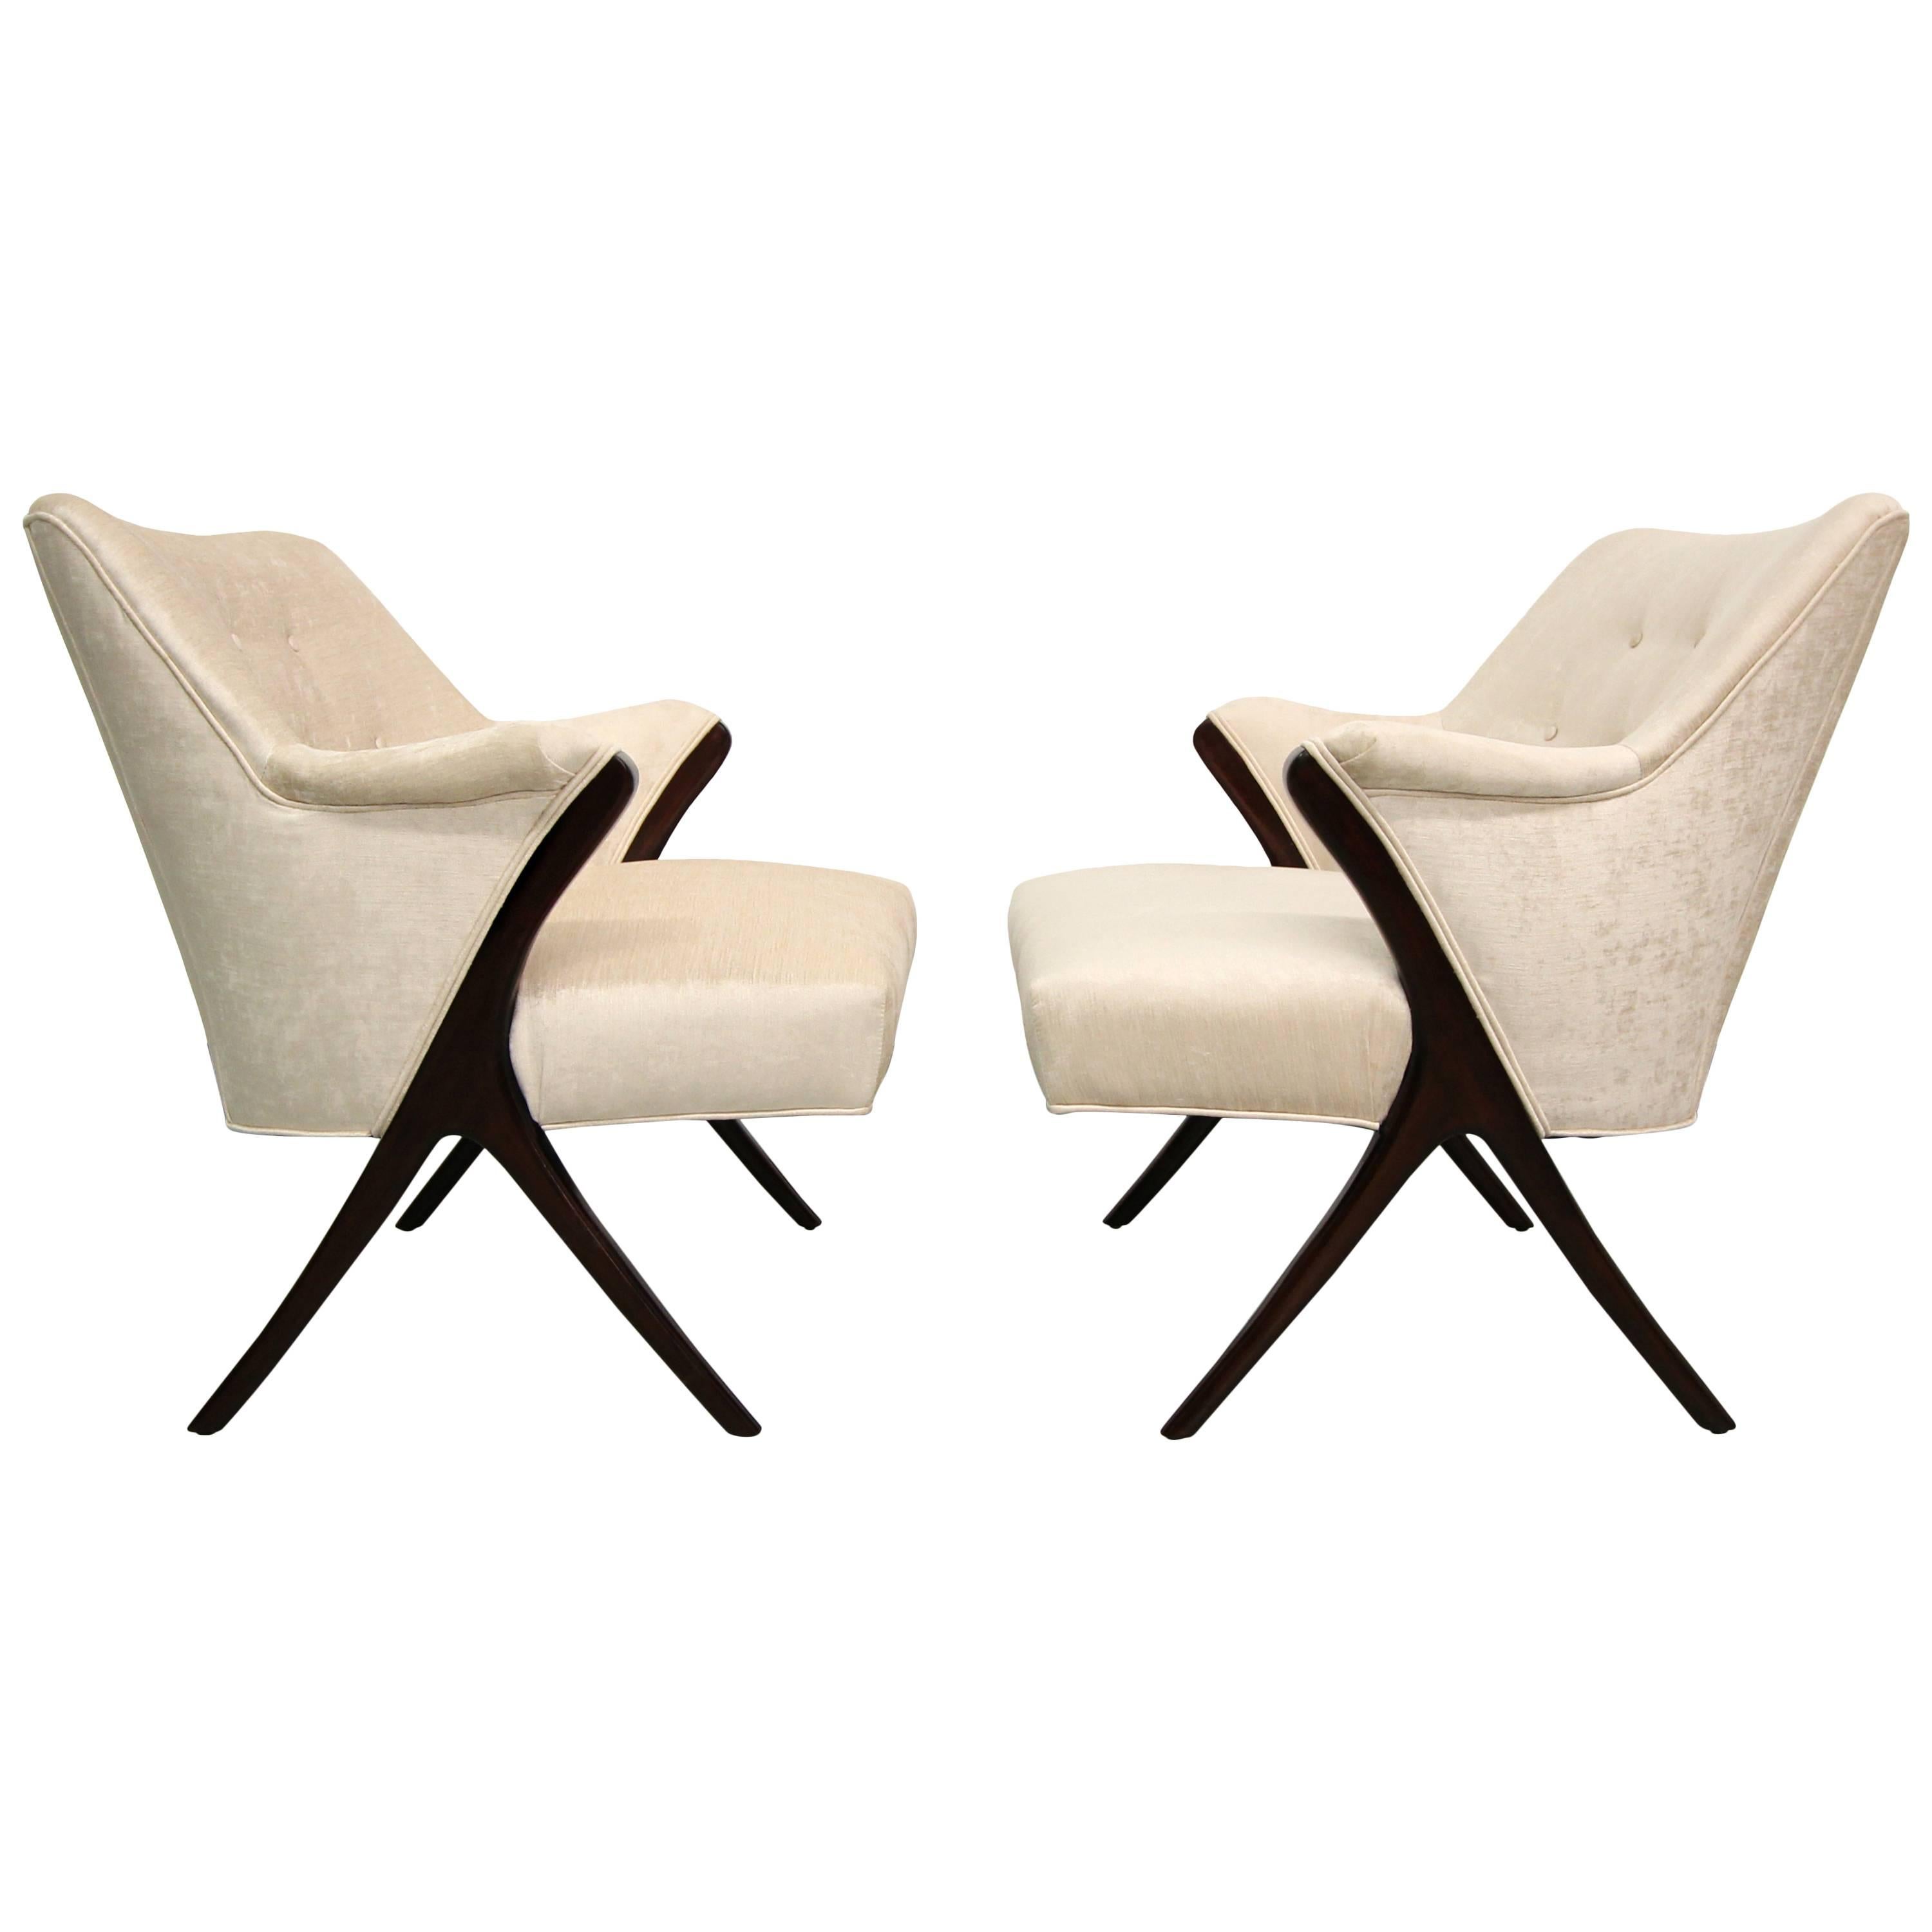 Exquisite Pair of Mid-Century Scissor Lounge Chairs in the Style of Karpen